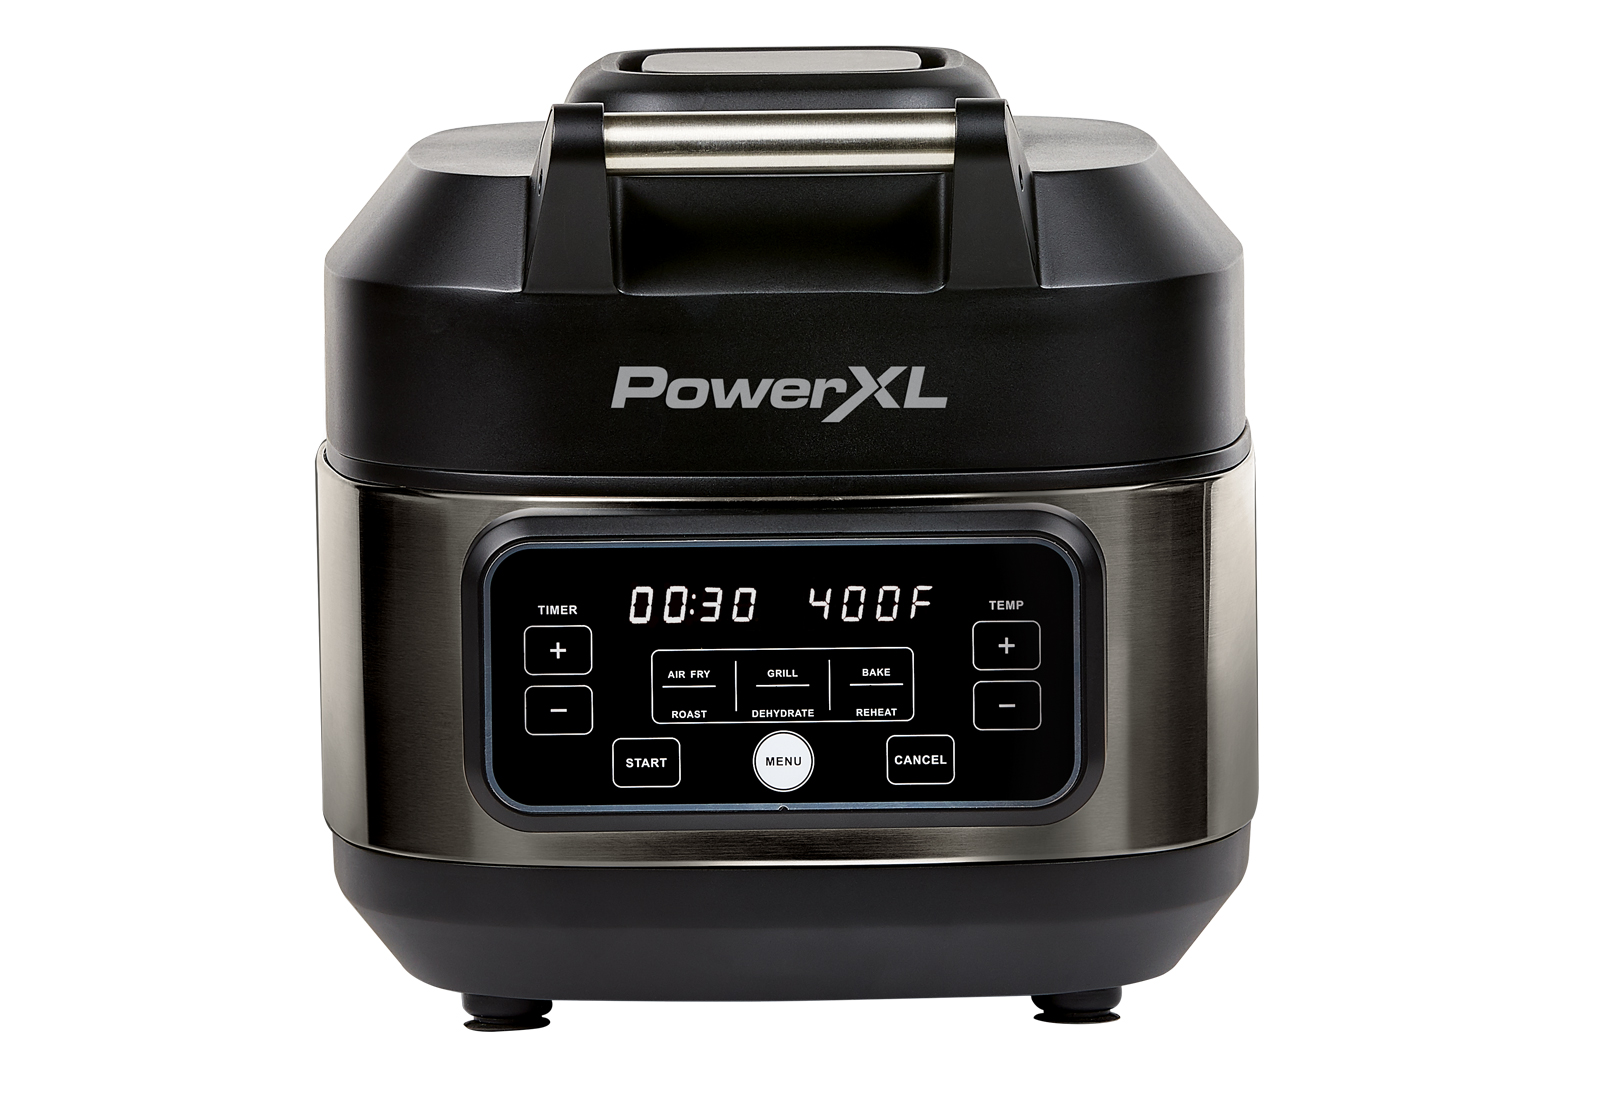 PowerXL Grill Air Fryer Home Product Image